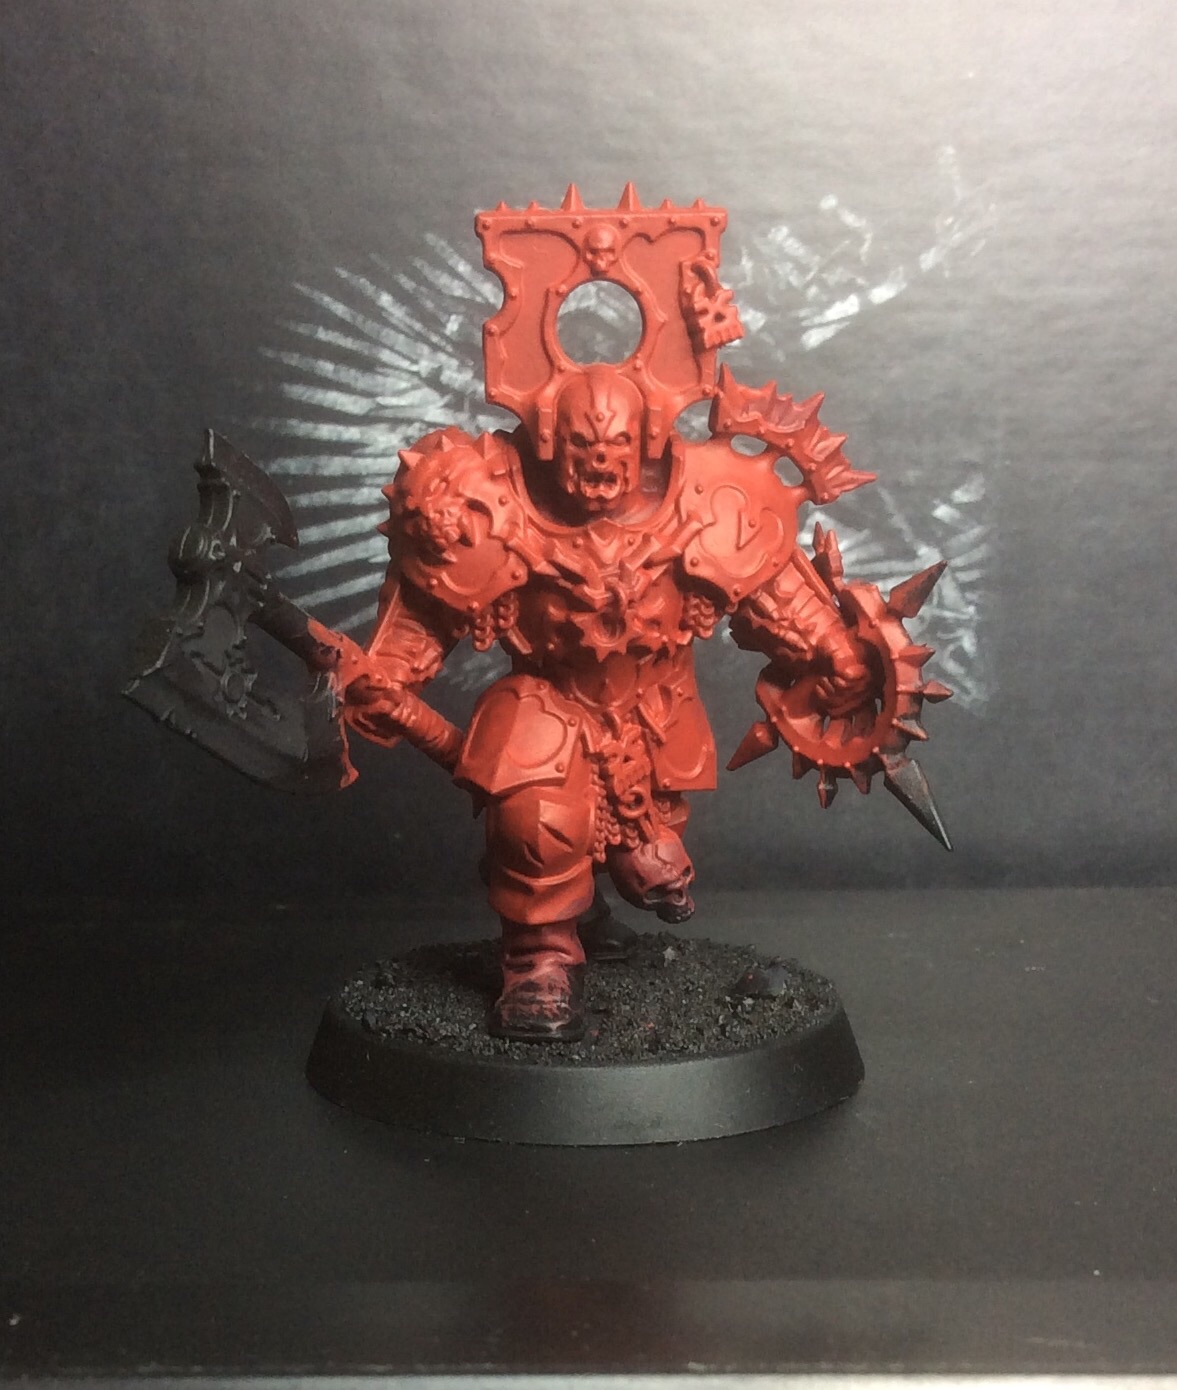 Vedhæft til Ambient Forbyde Tabletop Apocalypse: How to Paint Age of Sigmar Khorne Bloodbound